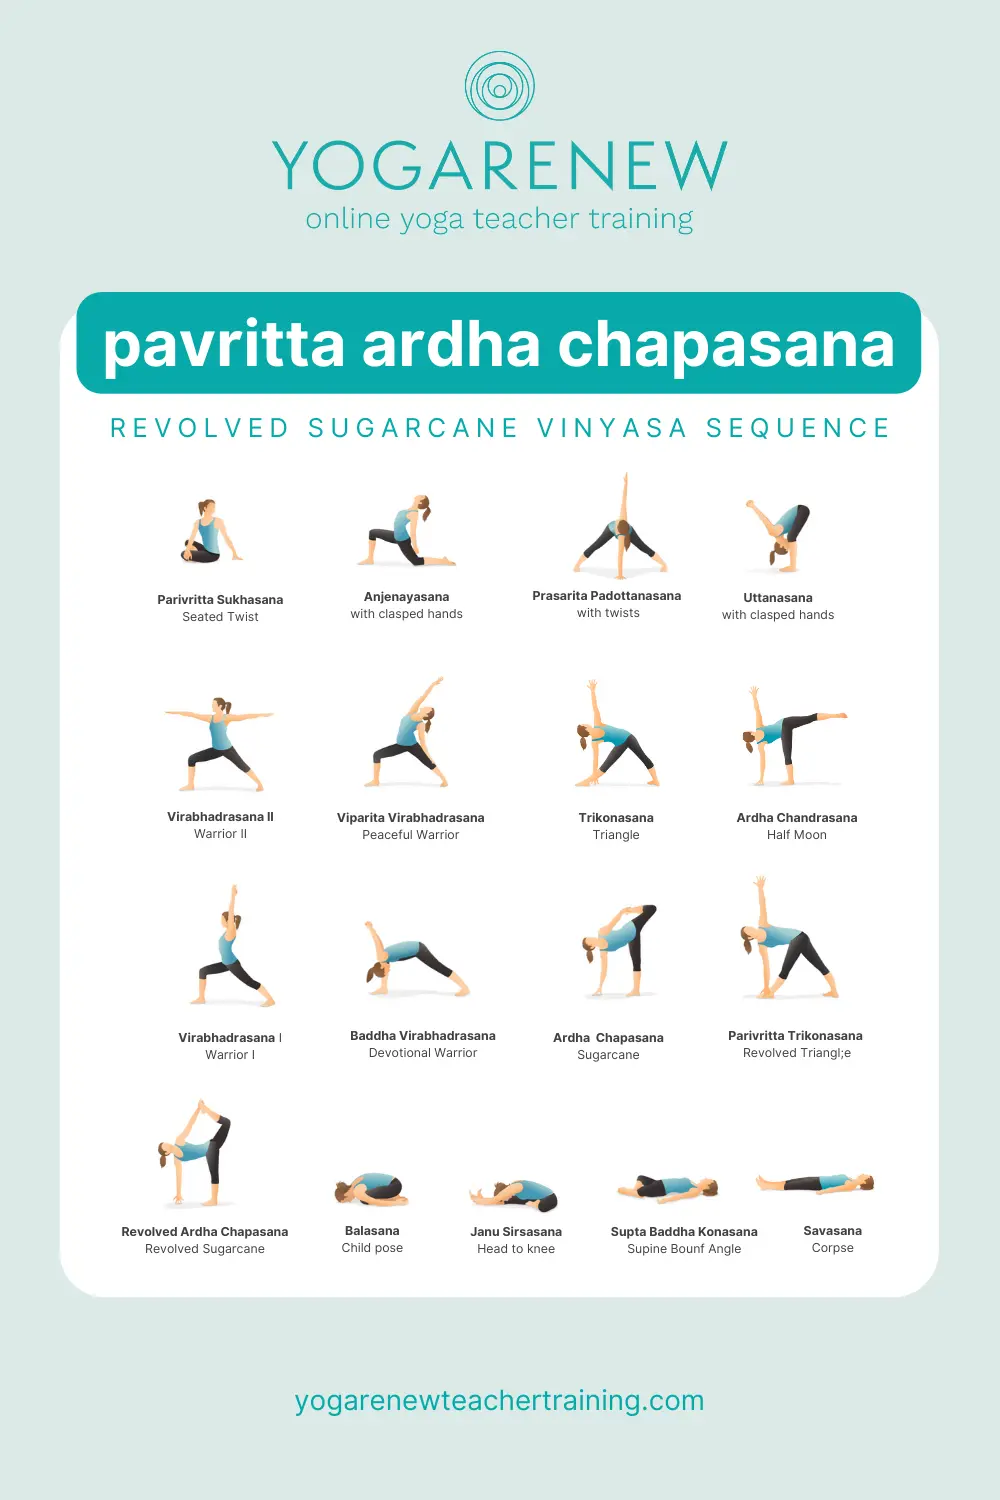 vinyasa yoga sequence ideas - What are the correct order of poses in a vinyasa